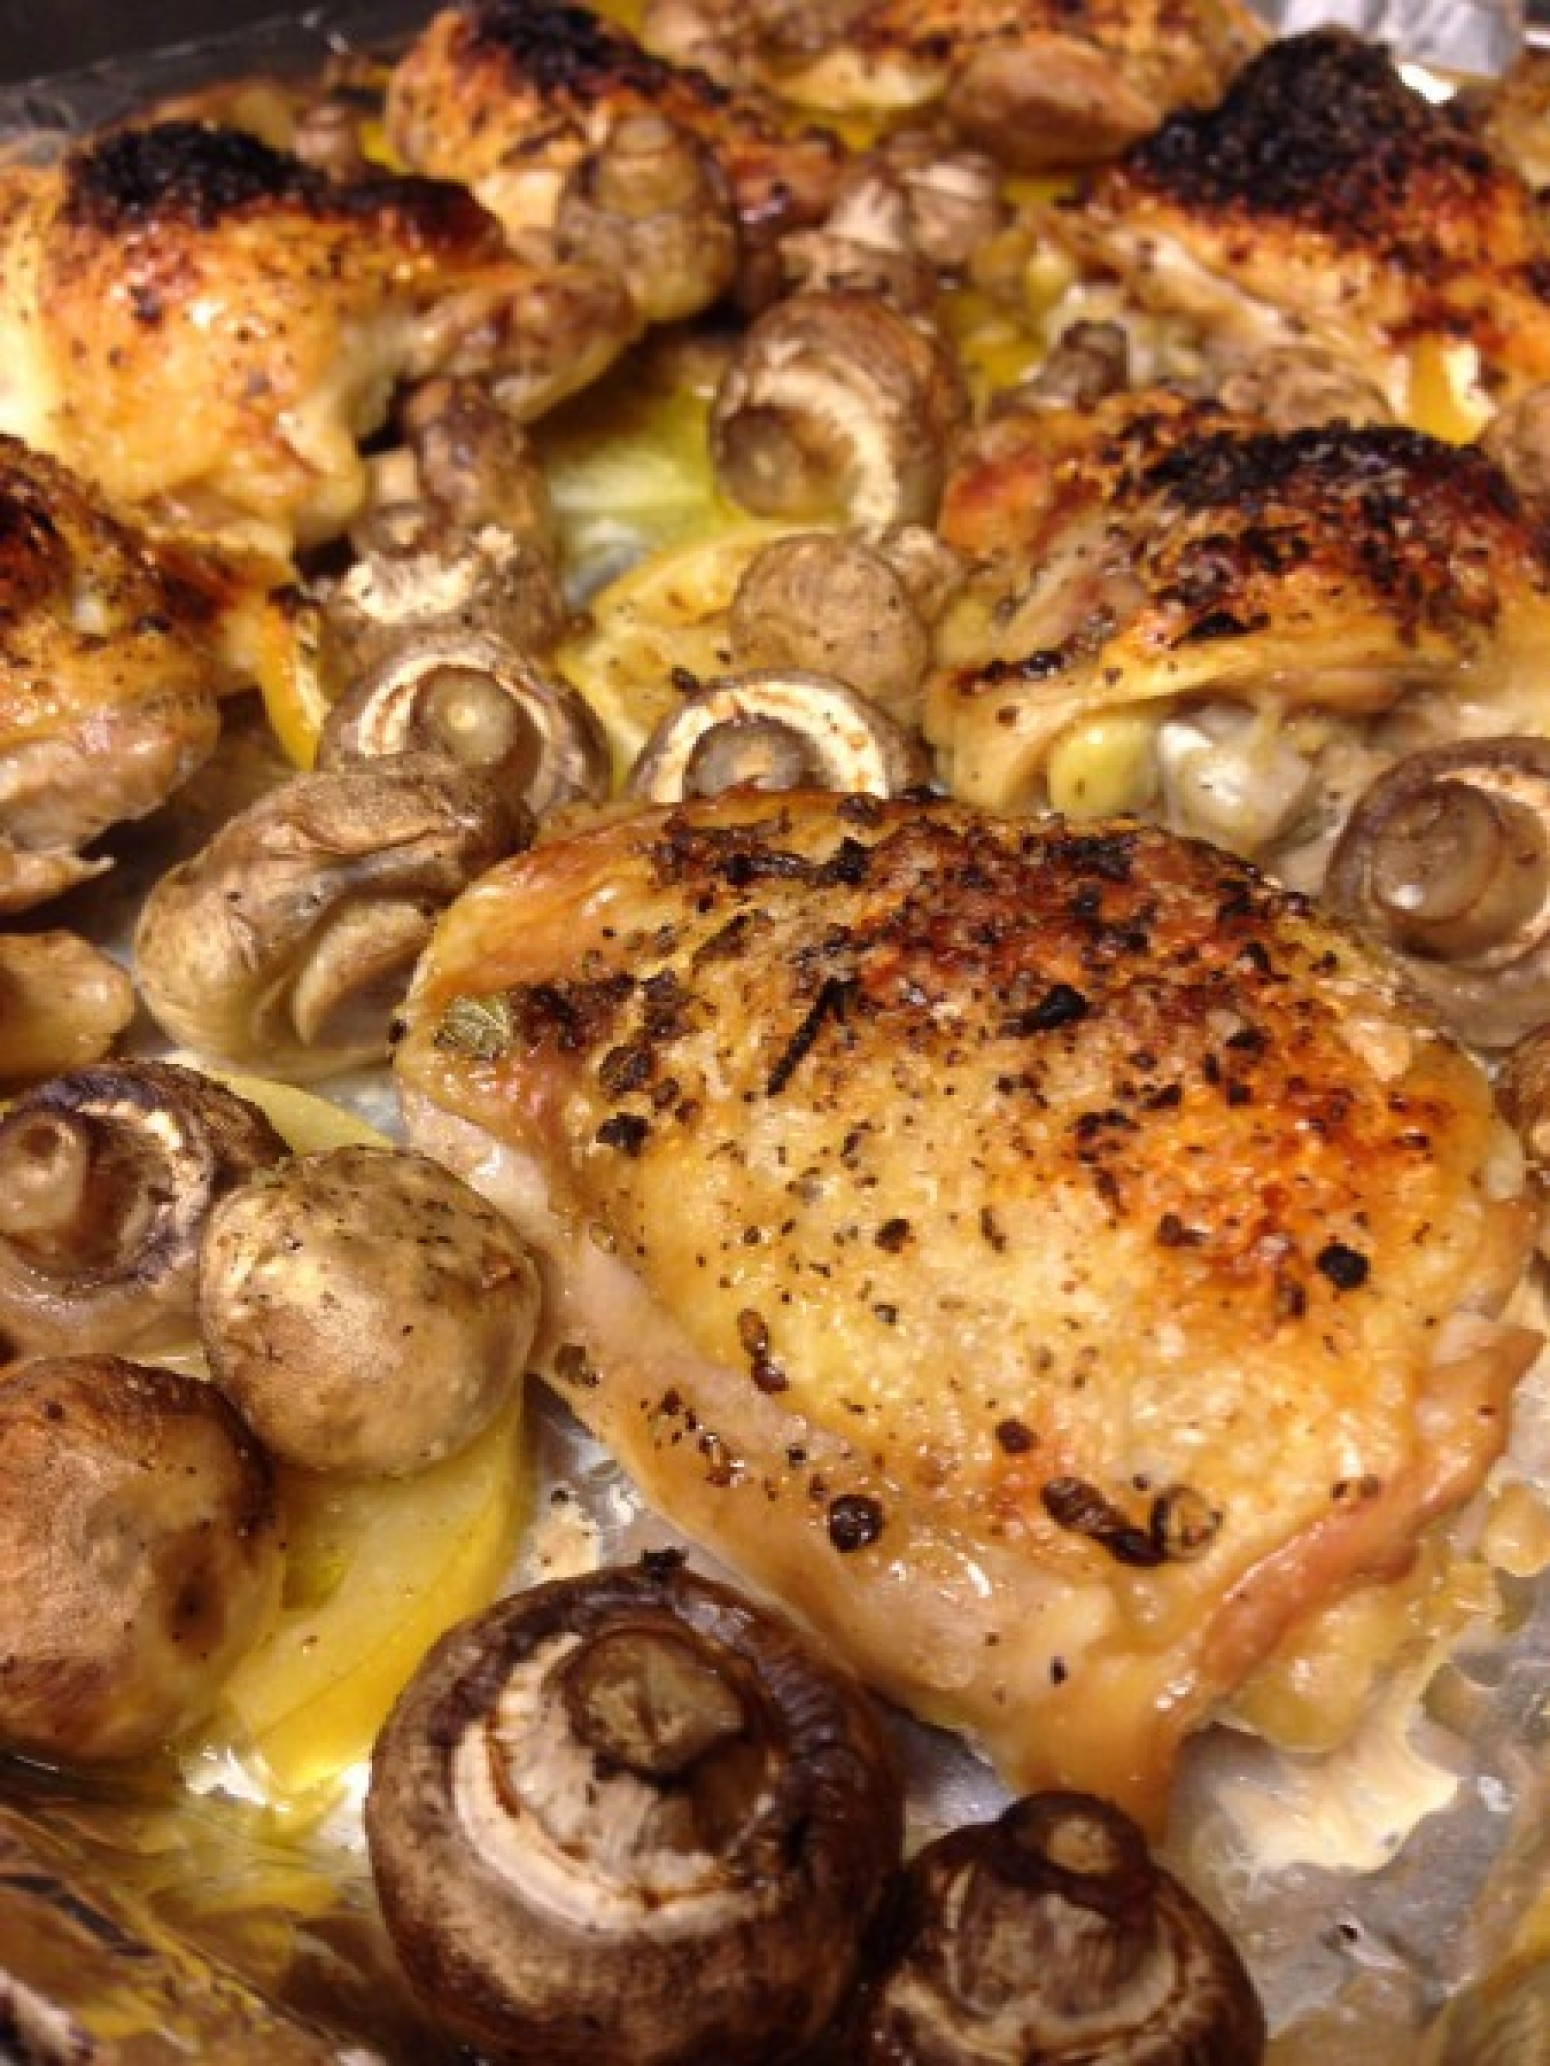 Roasted Chicken Thighs Recipe
 Hot Oven Roasted Chicken Thighs Recipe